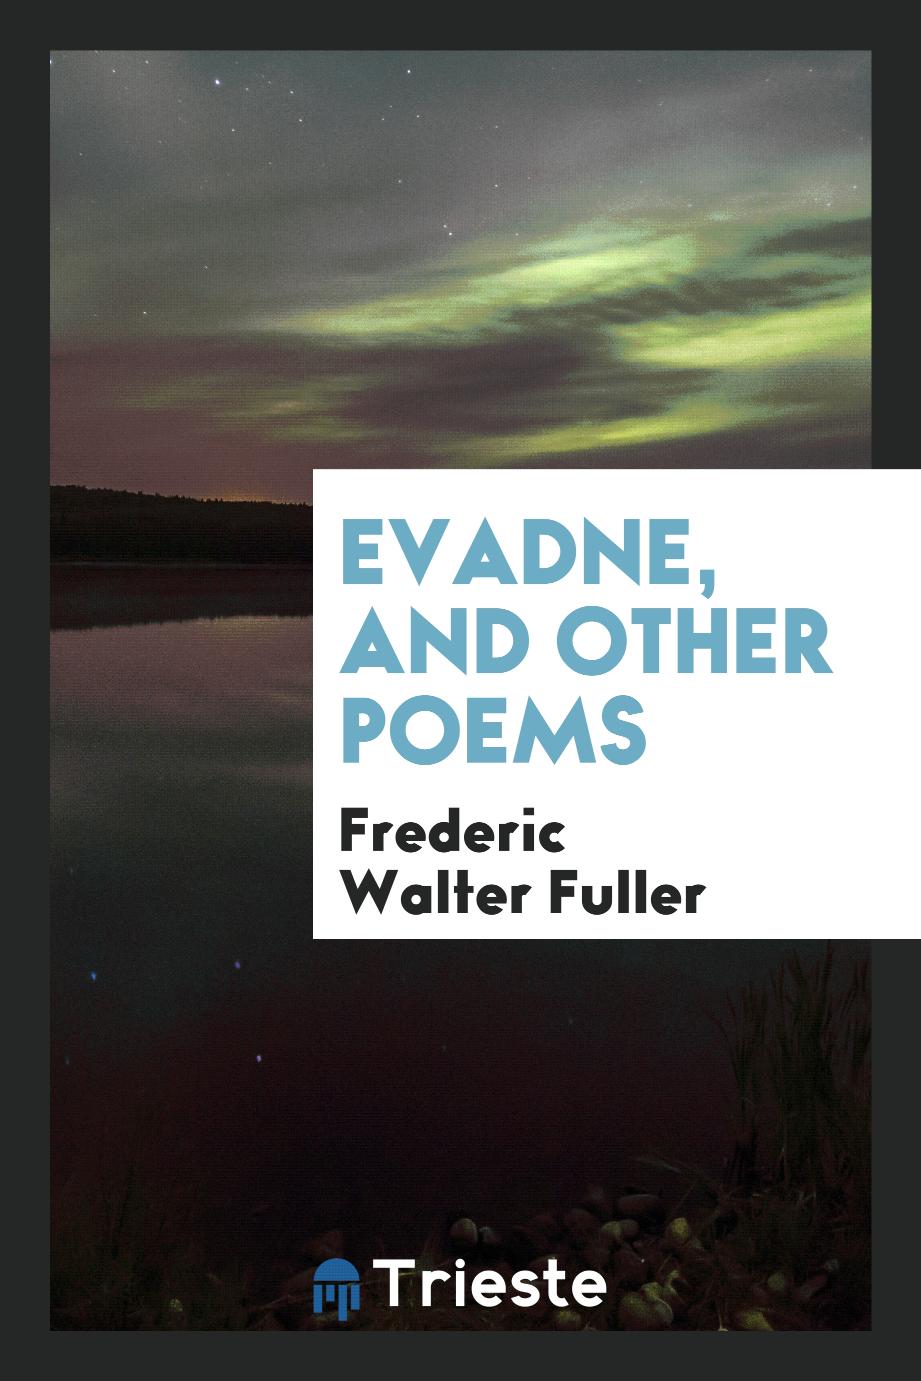 Evadne, and Other Poems